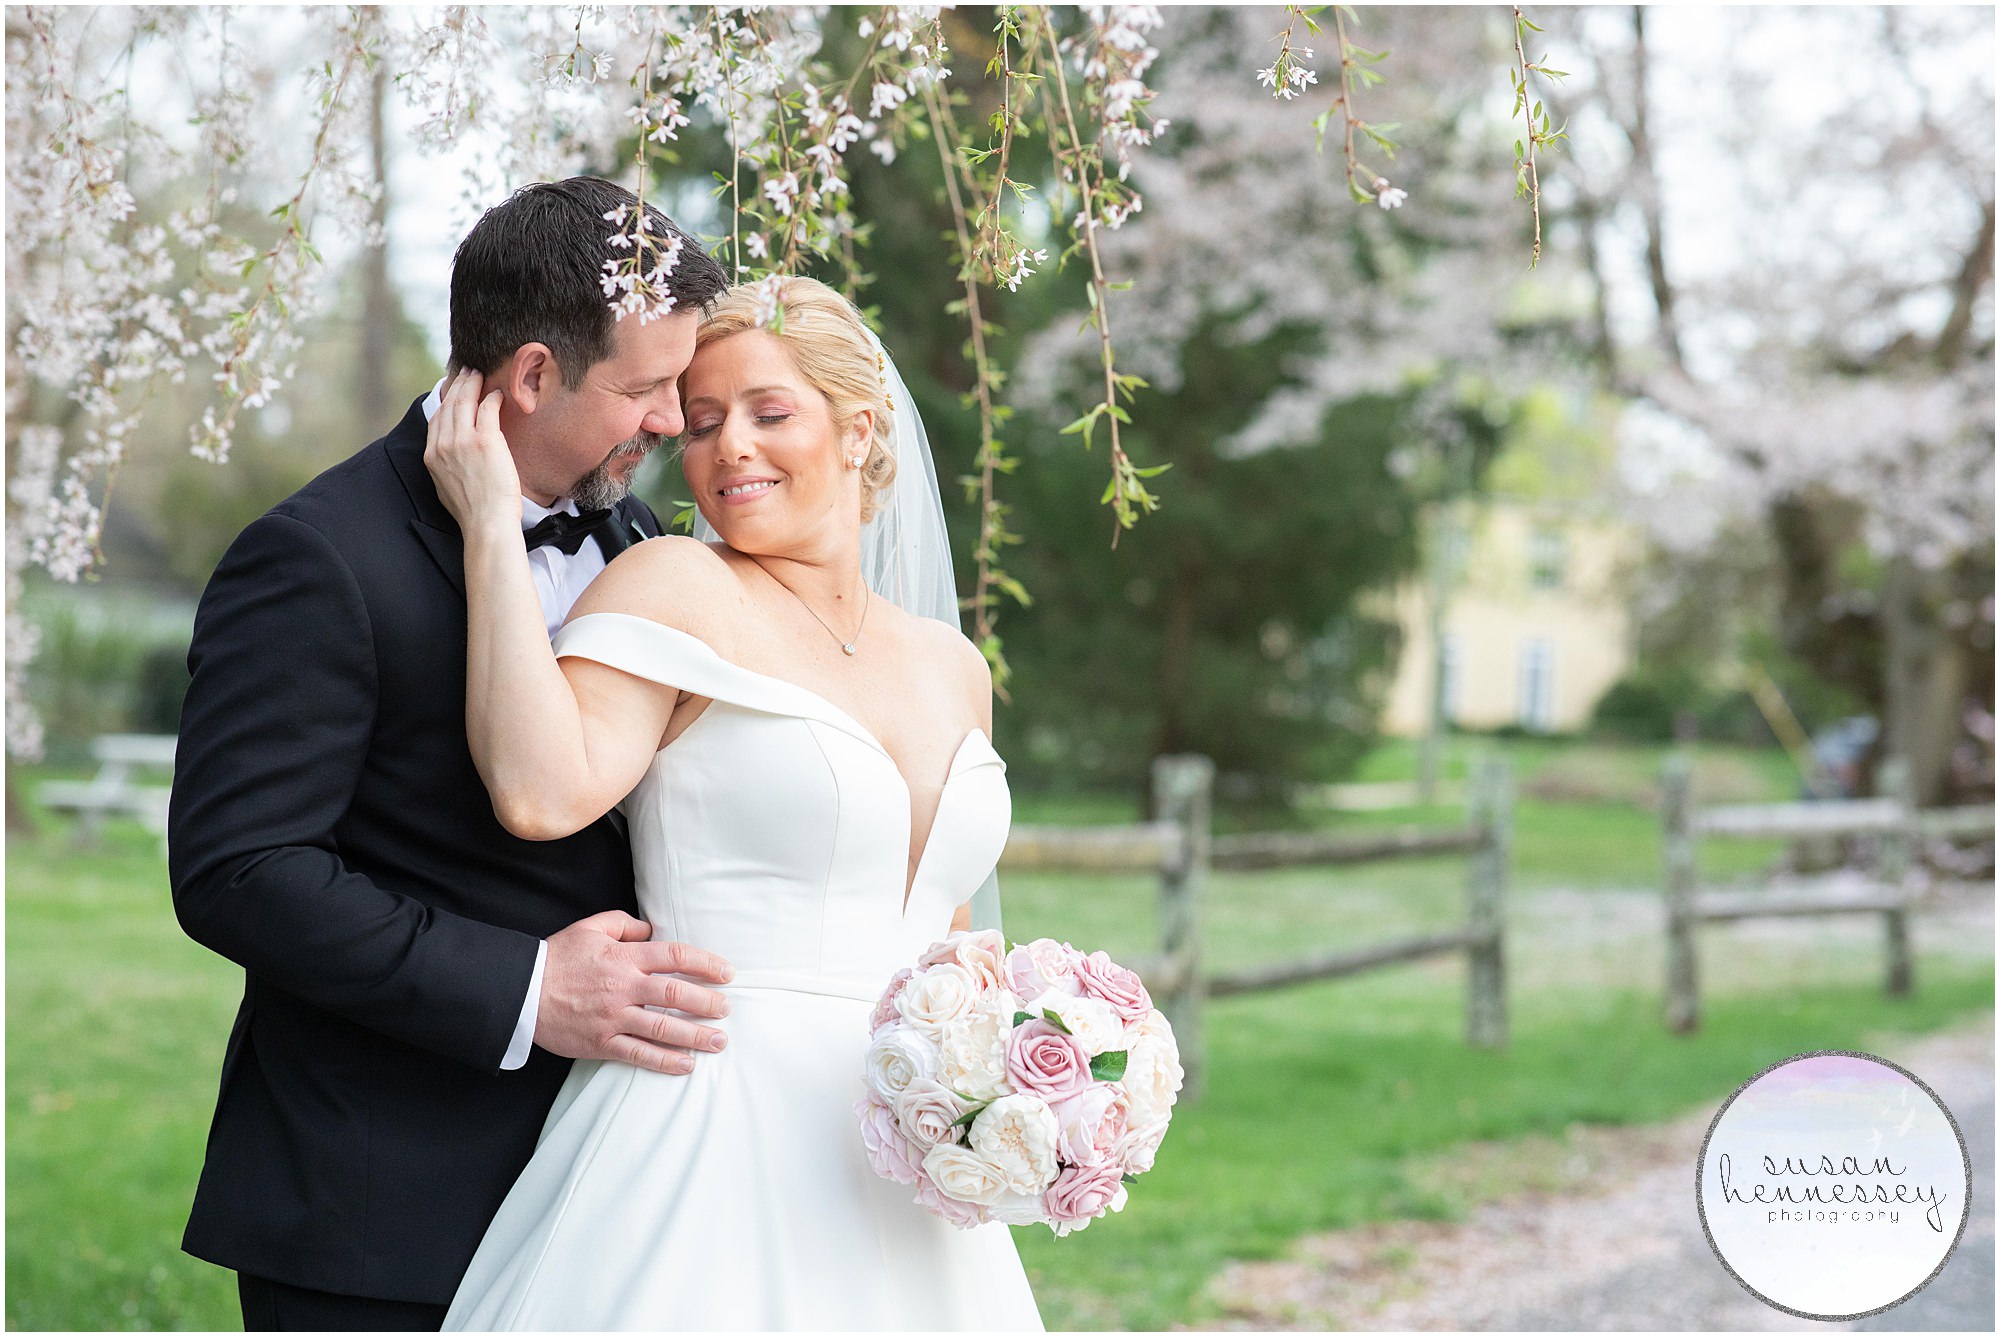 Are you planning a Micro Wedding? Erica and Alex's Spring wedding was filled with cherry blossoms.